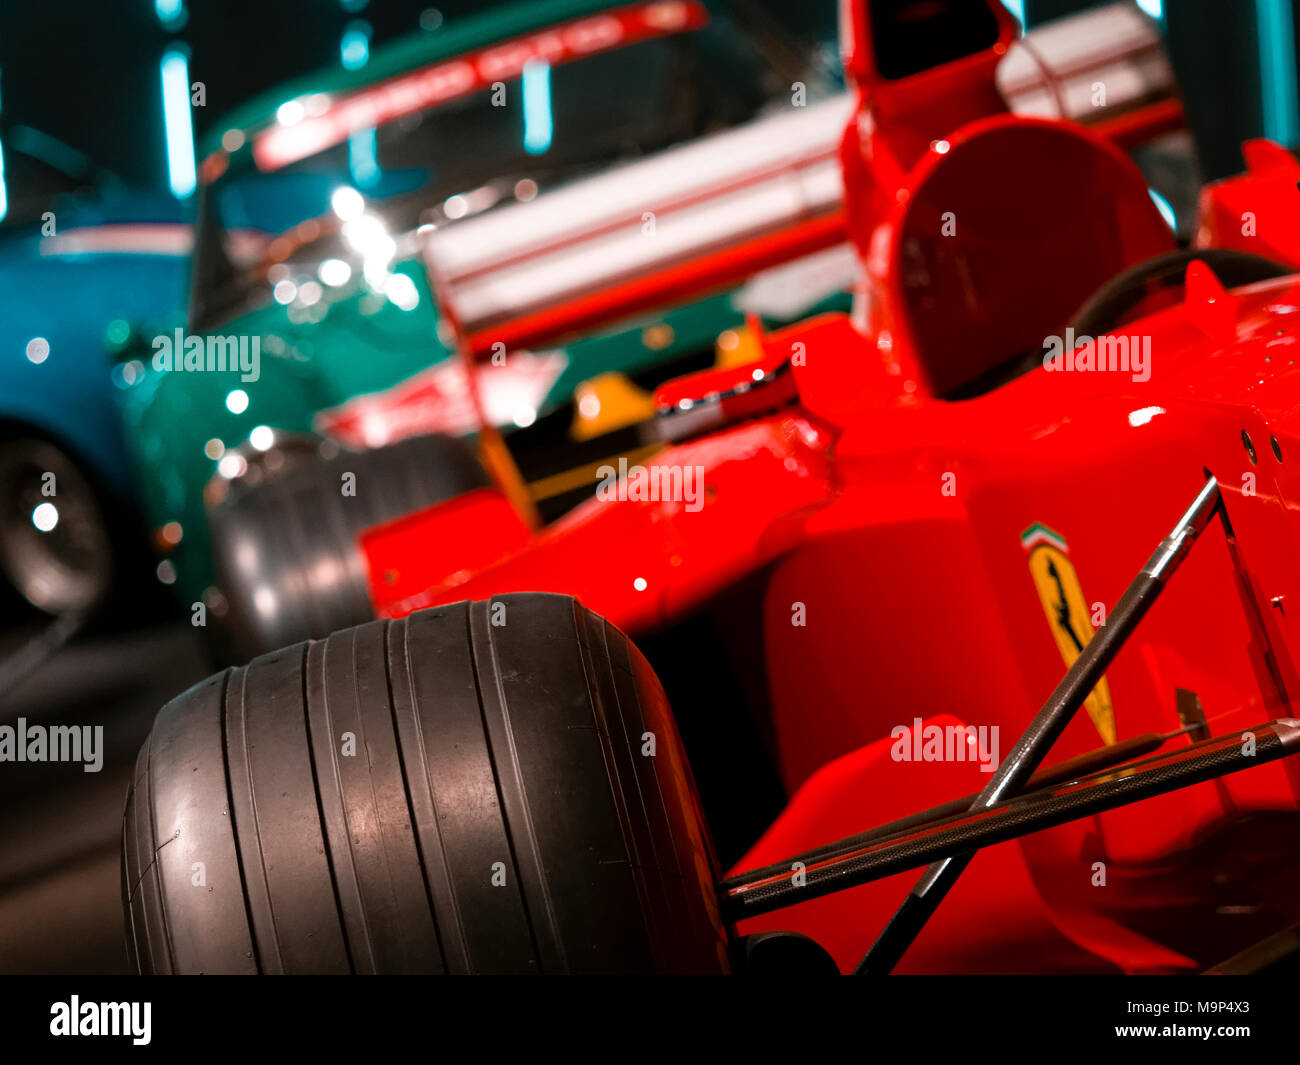 Detail of Old and New Ferrari cars, Ferrari is an Italian Sports Car manufacturer founded in Italy 1947. Stock Photo